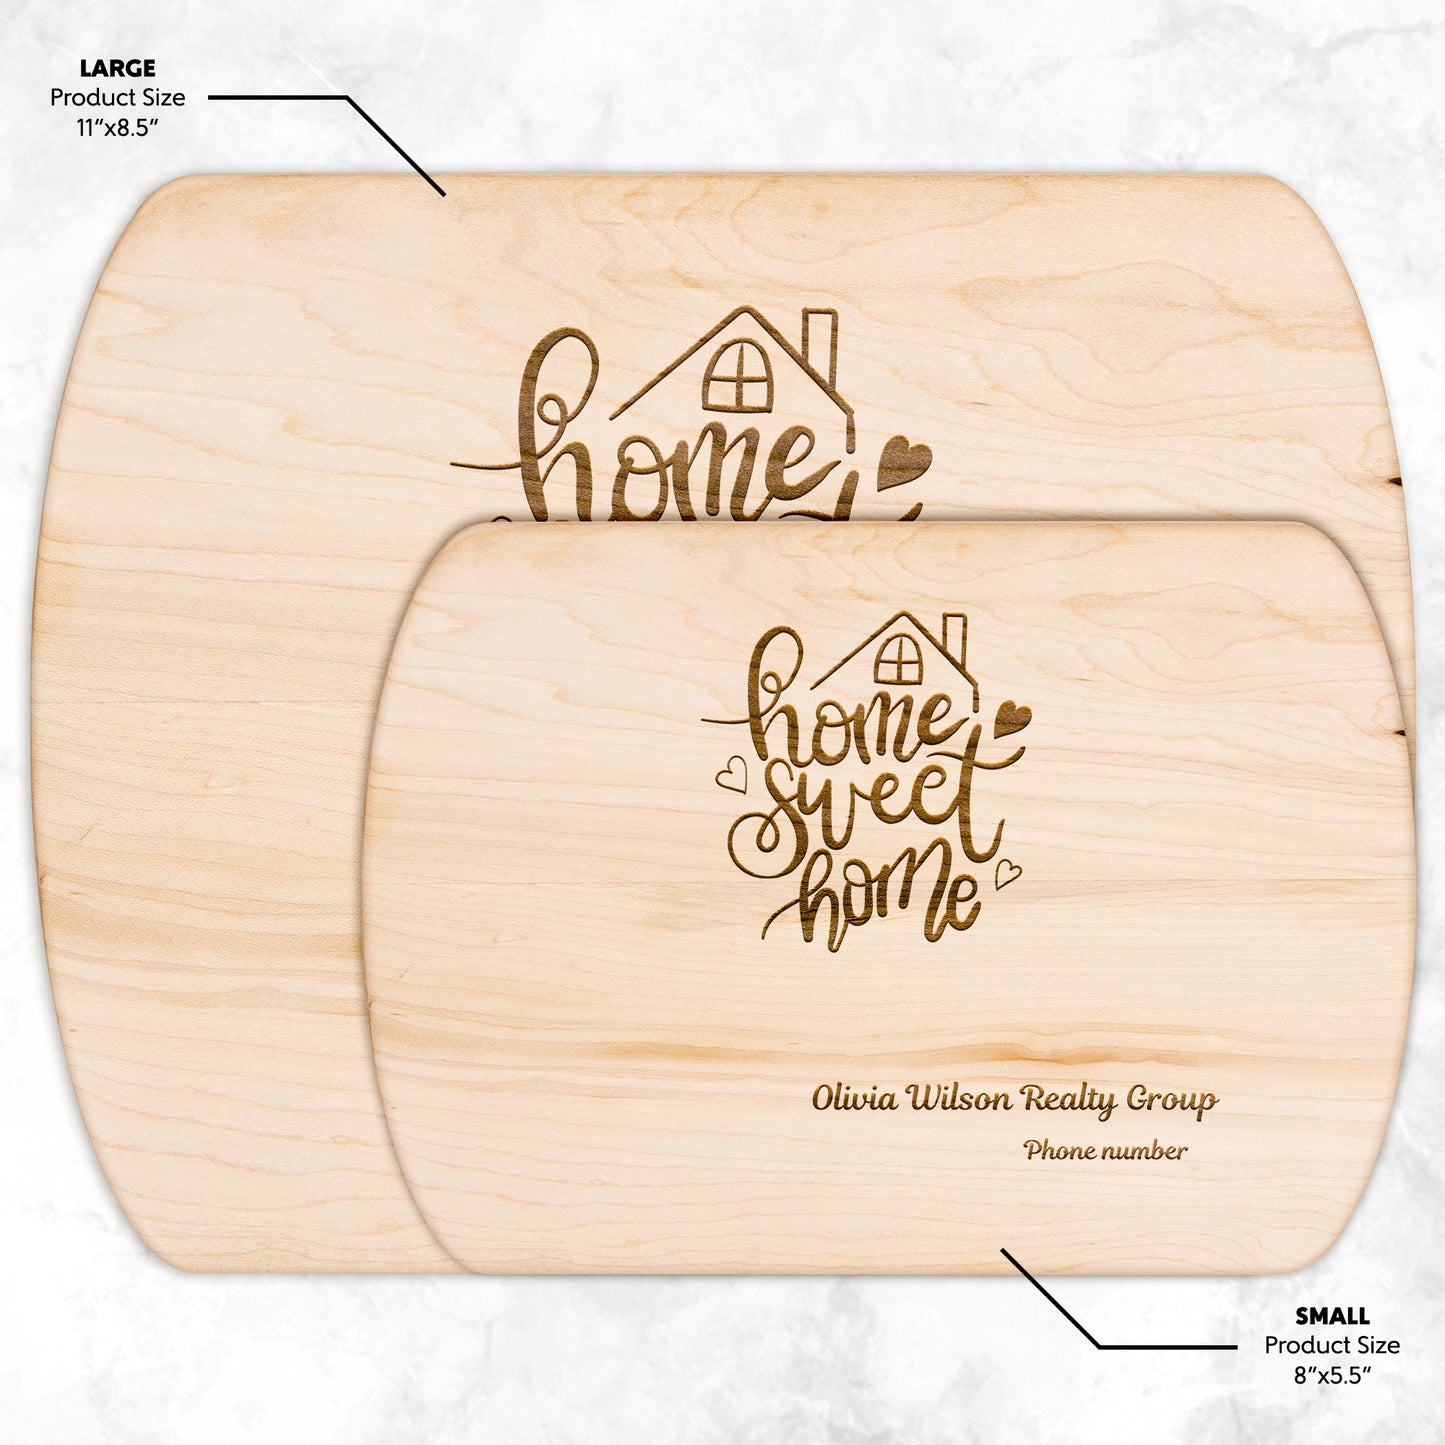 Real Estate Closing Gift, Personalized Cutting Board